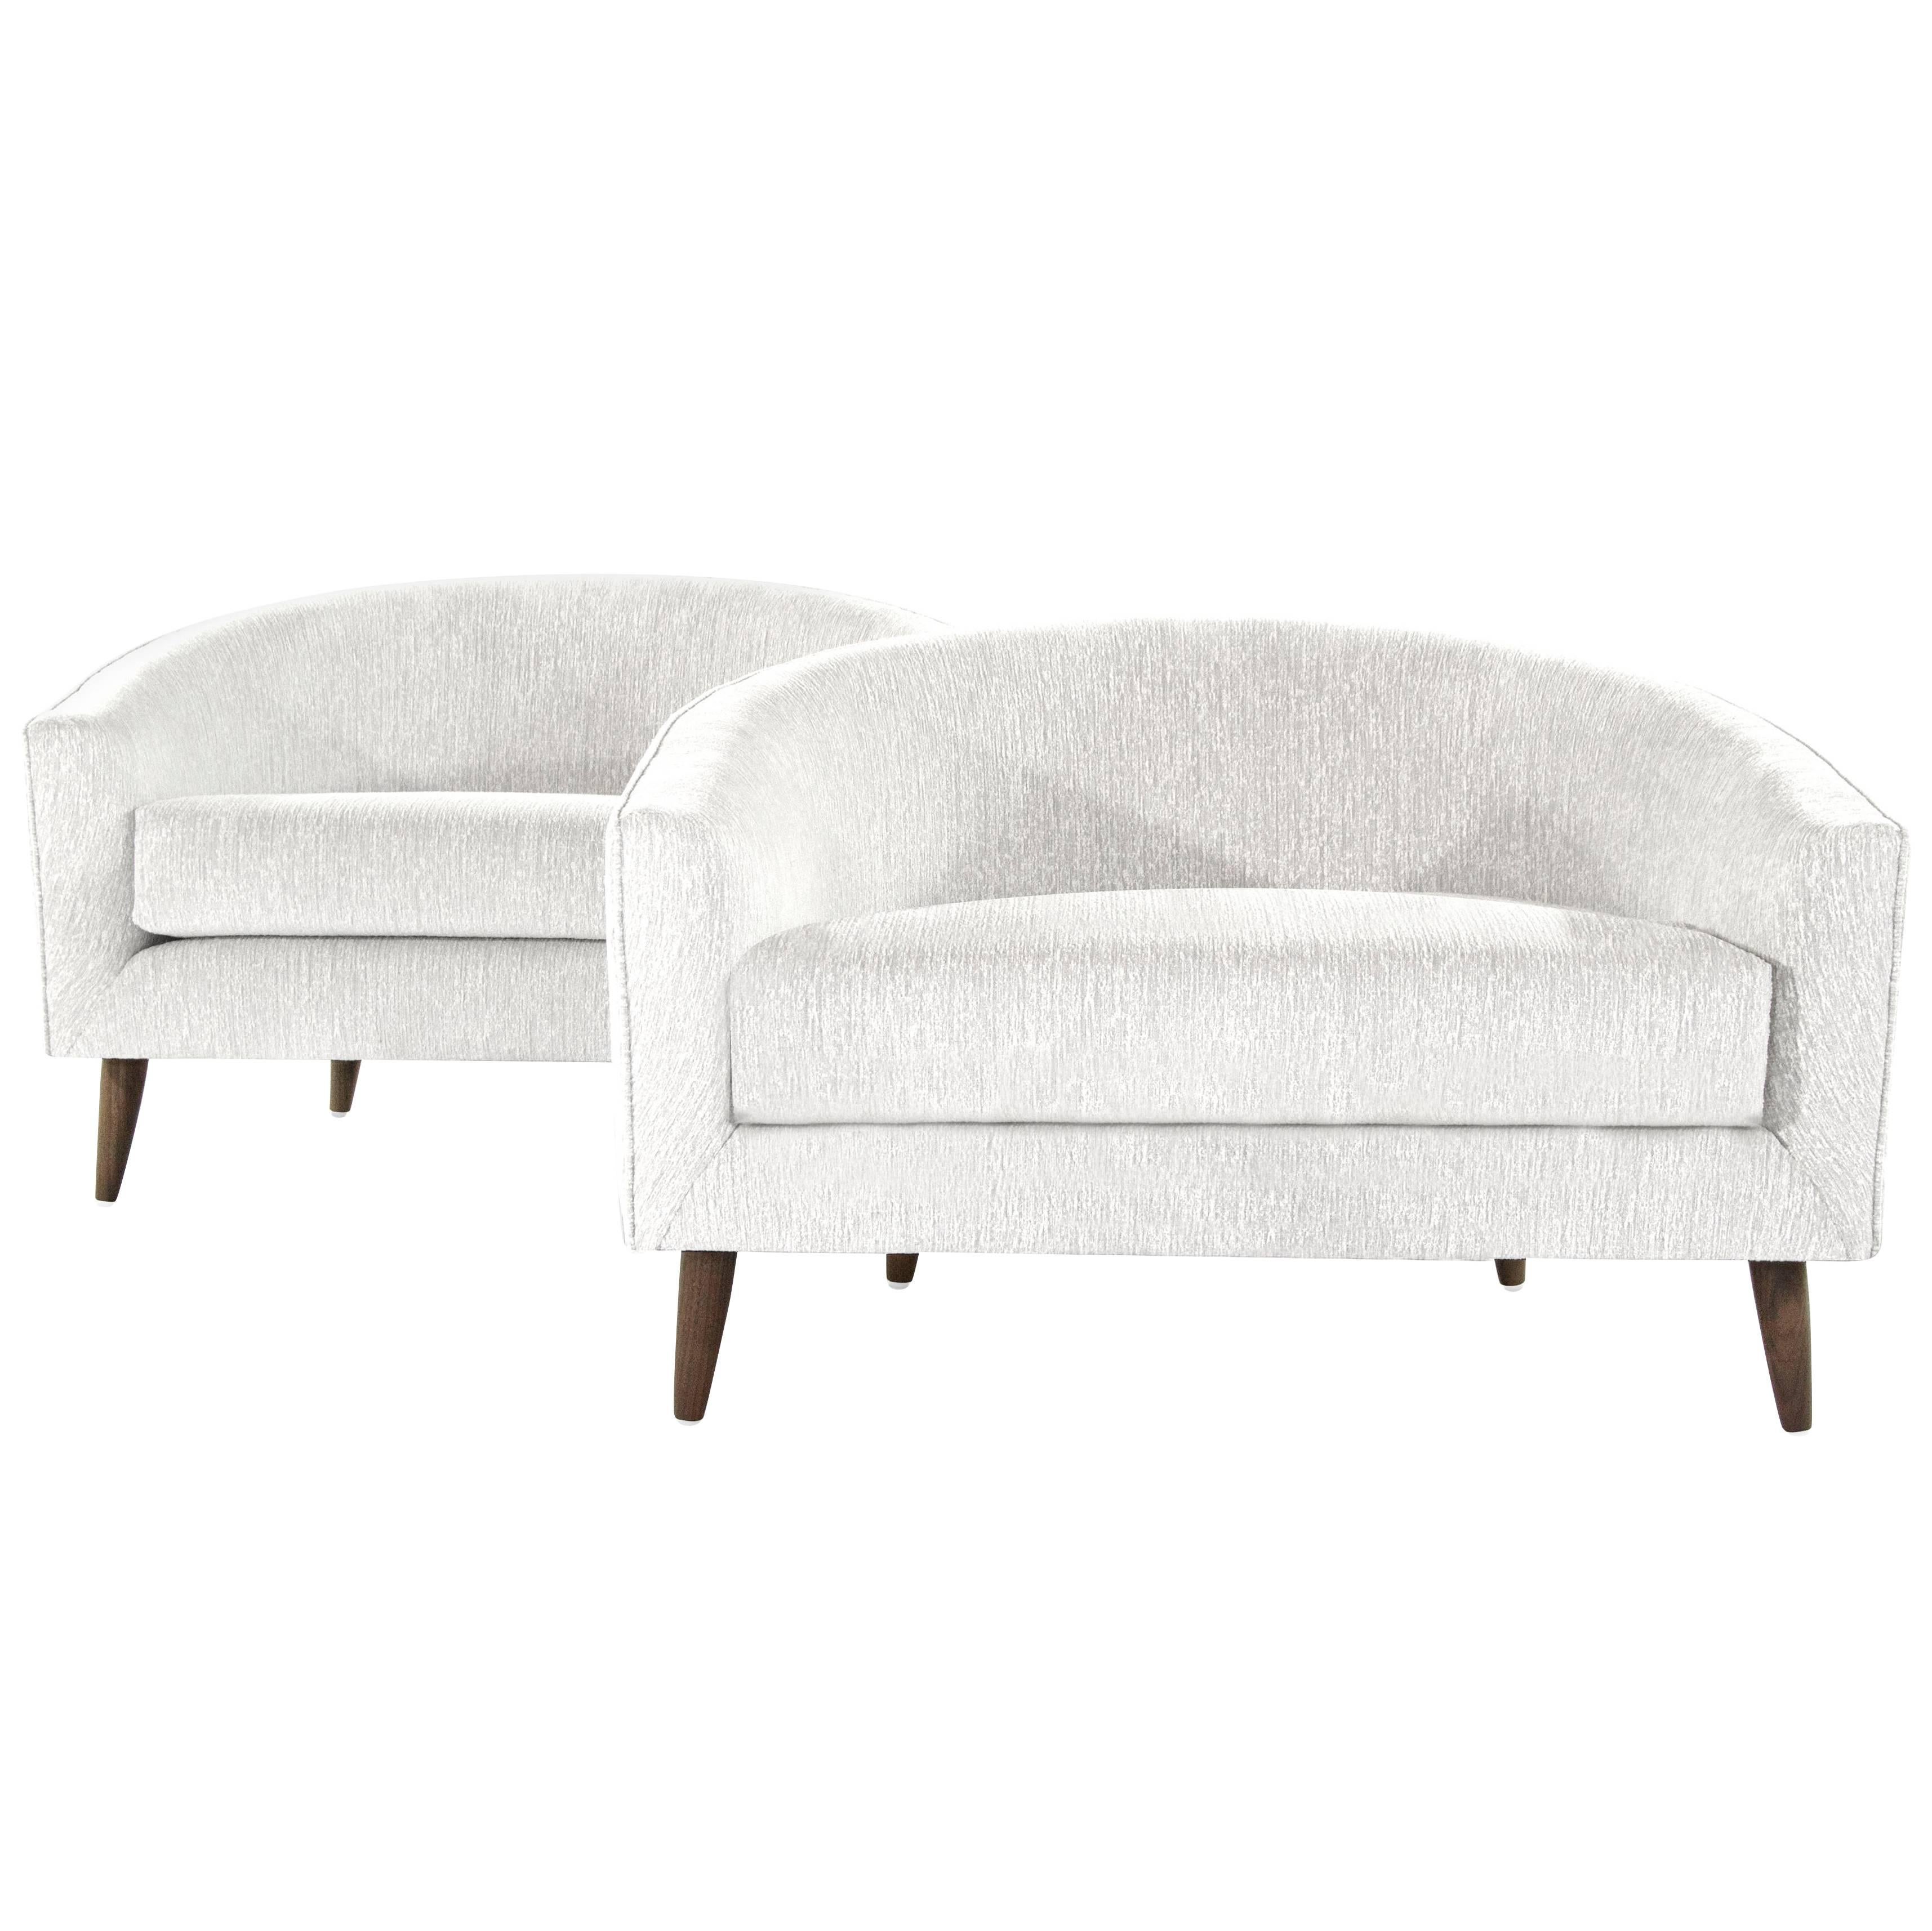 Adrian Pearsall for Craft Associates Cloud Lounges